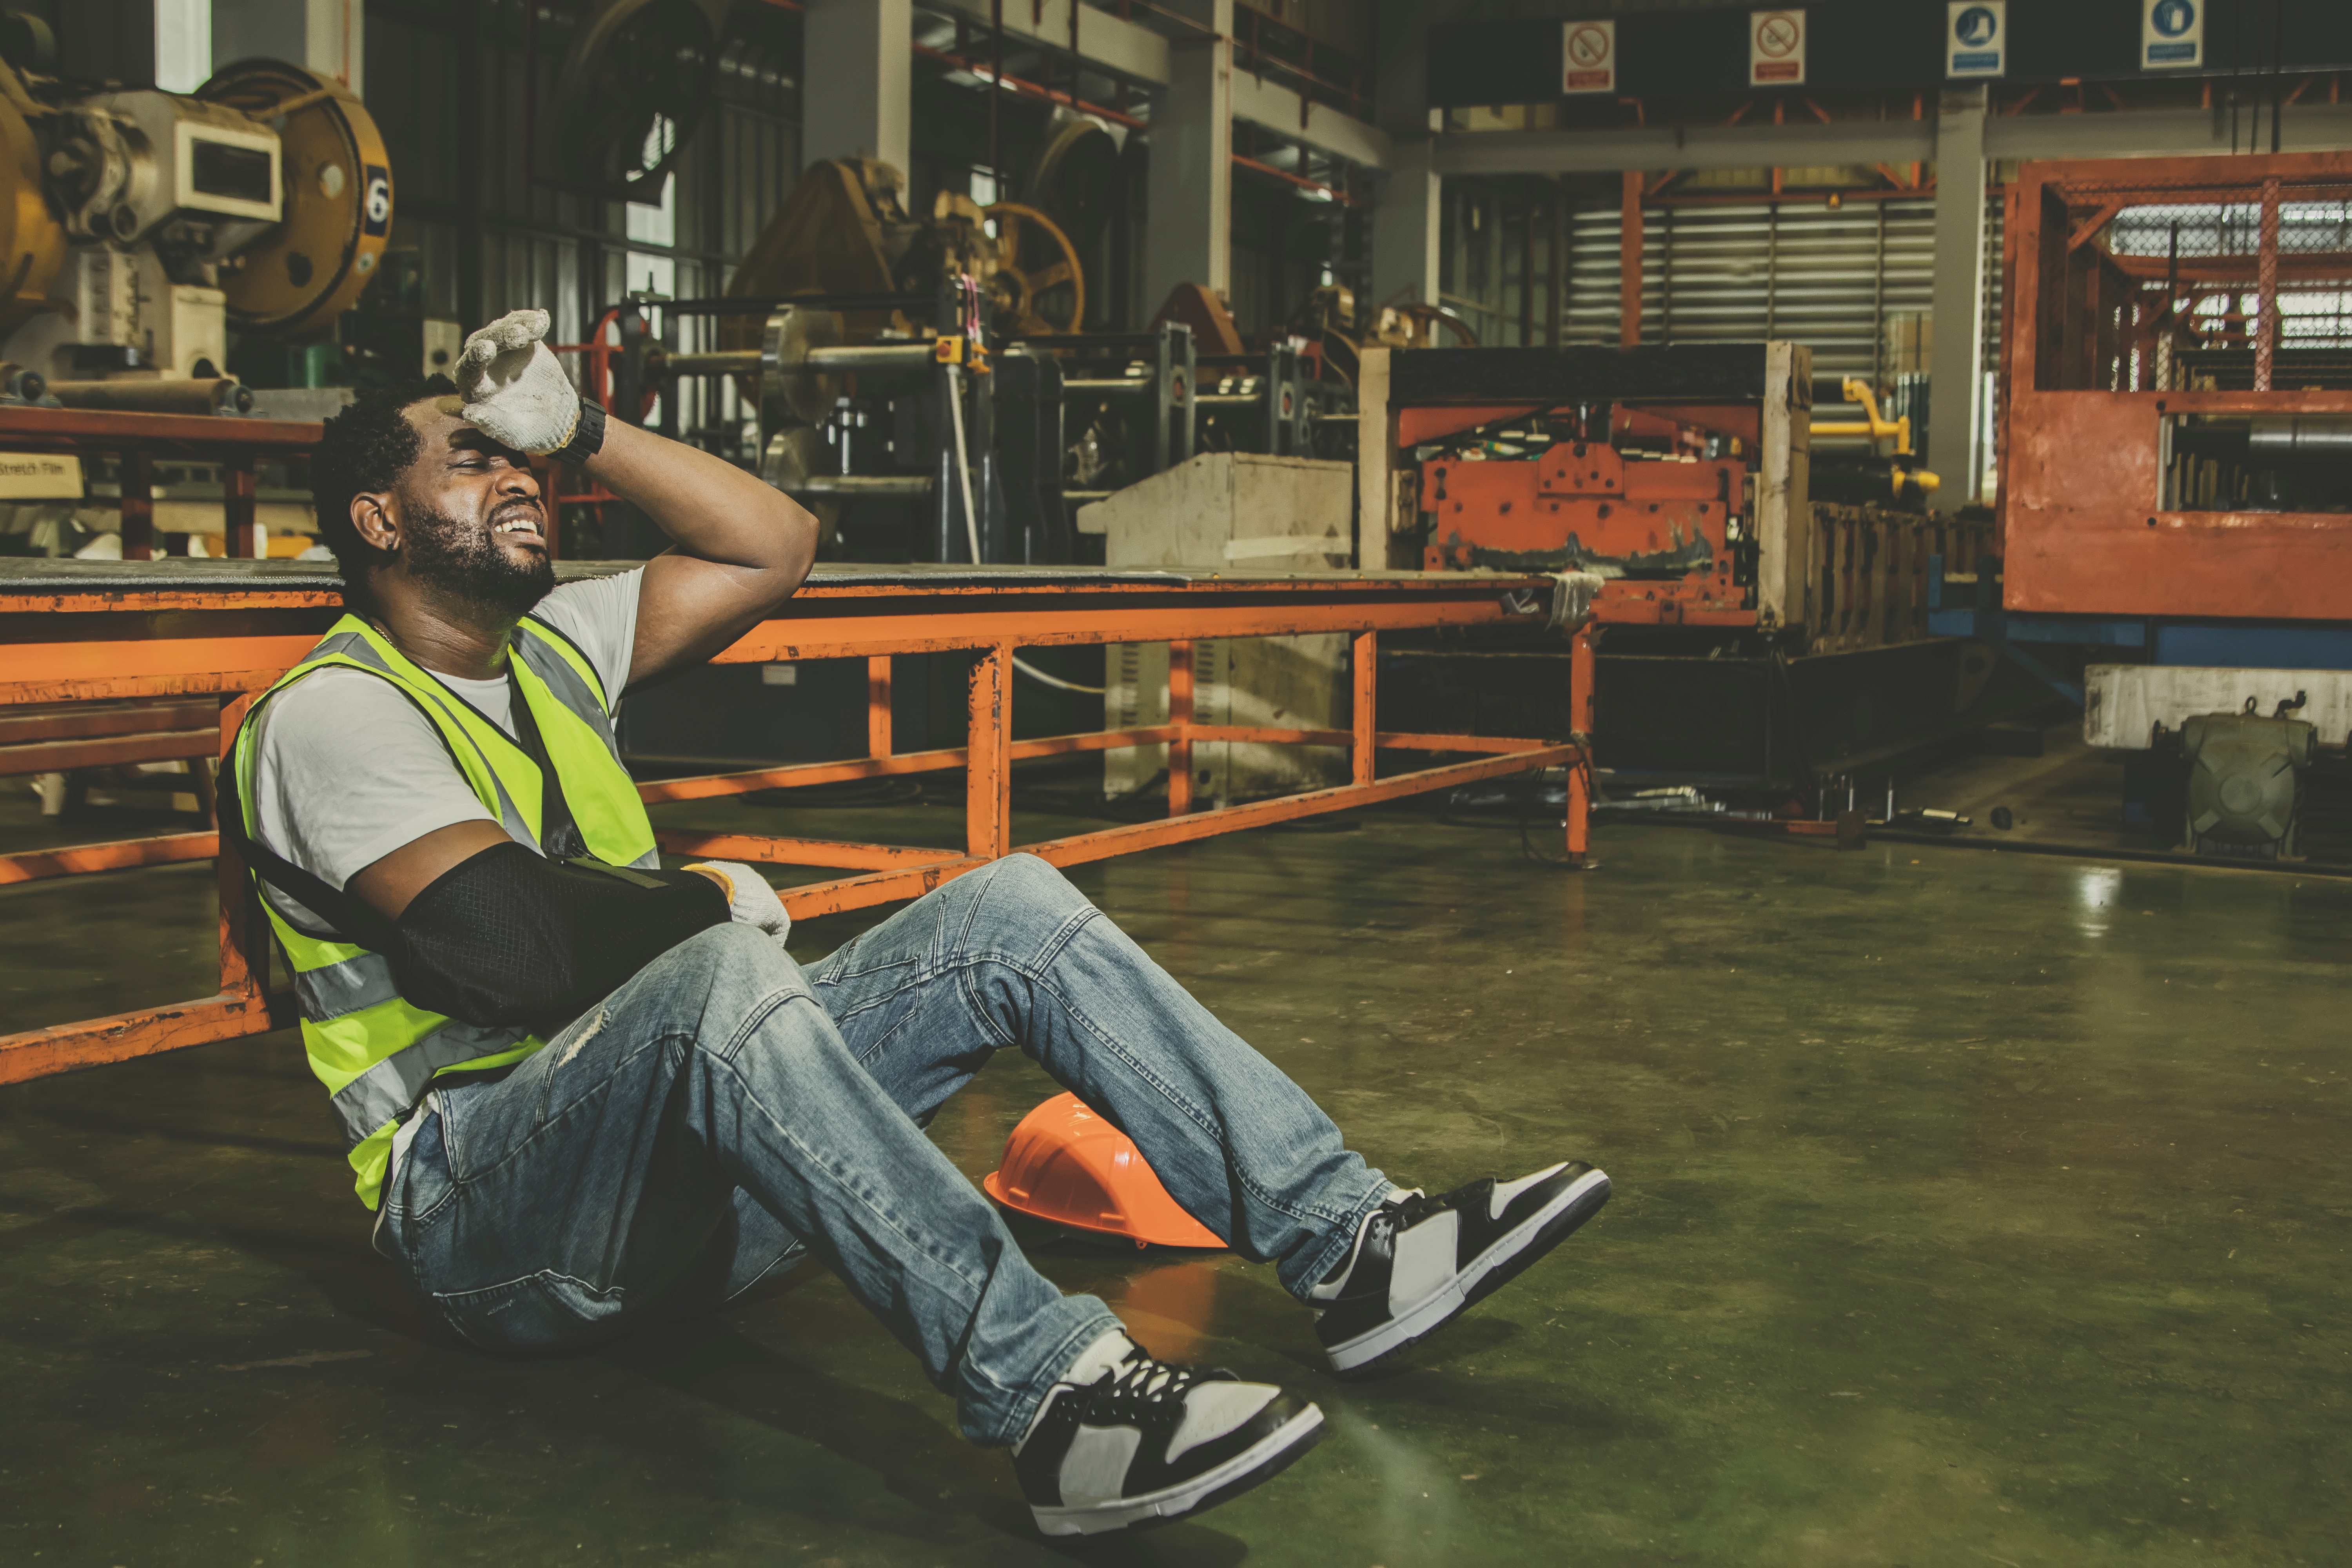 A tired worker sitting on the ground | Source: Shutterstock